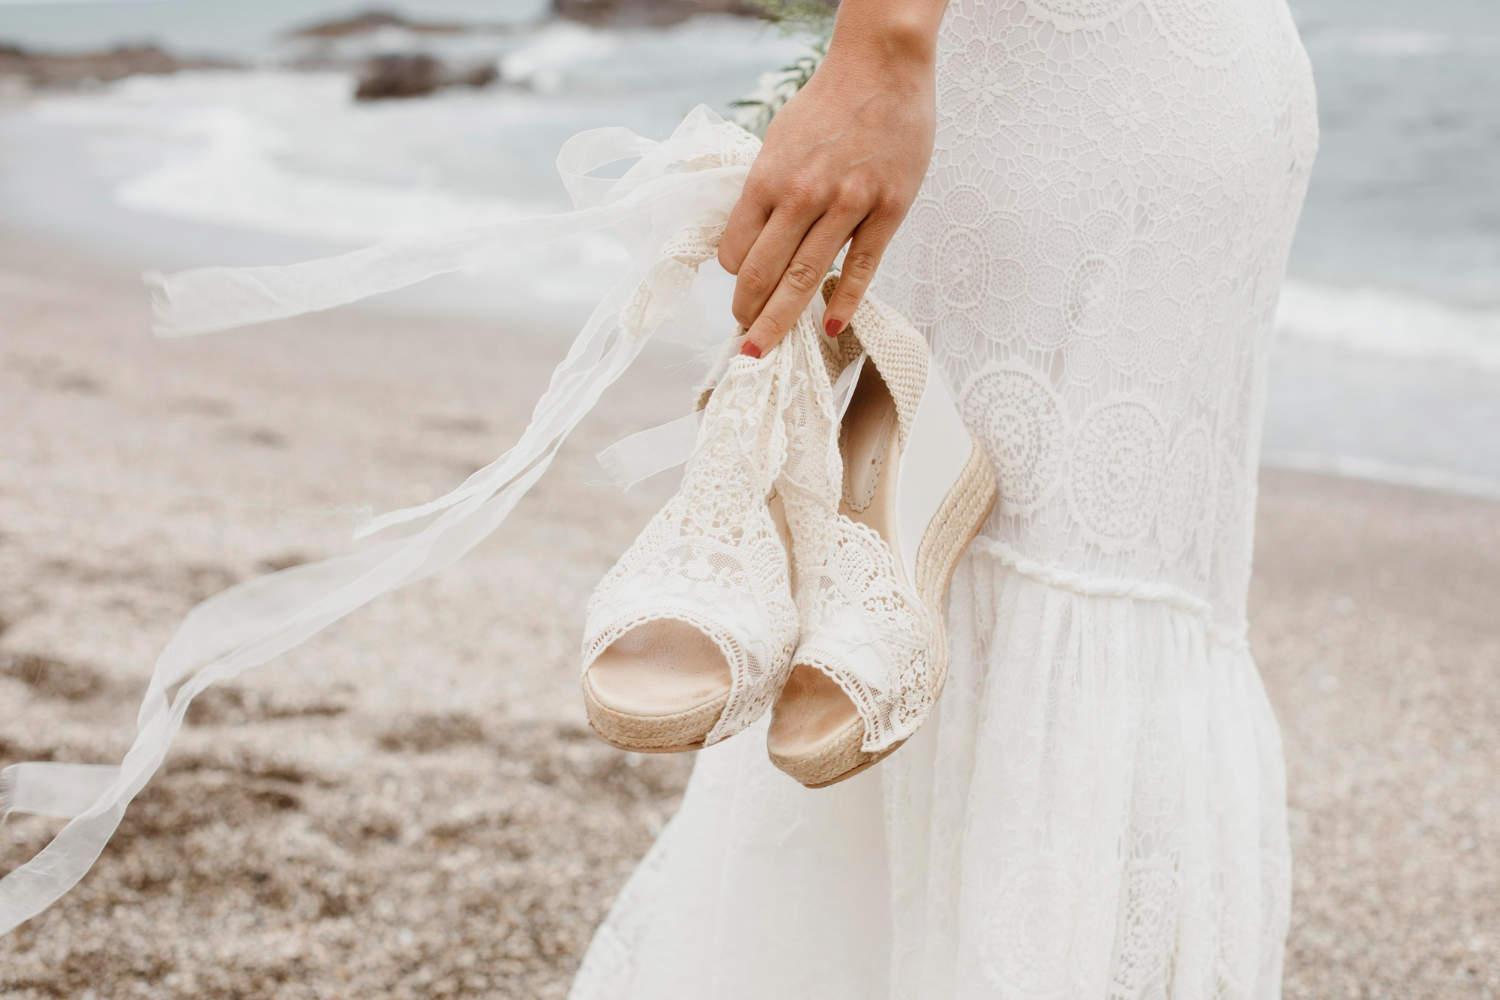 Top Five Reasons Why It's the Perfect Beach Wedding Destination